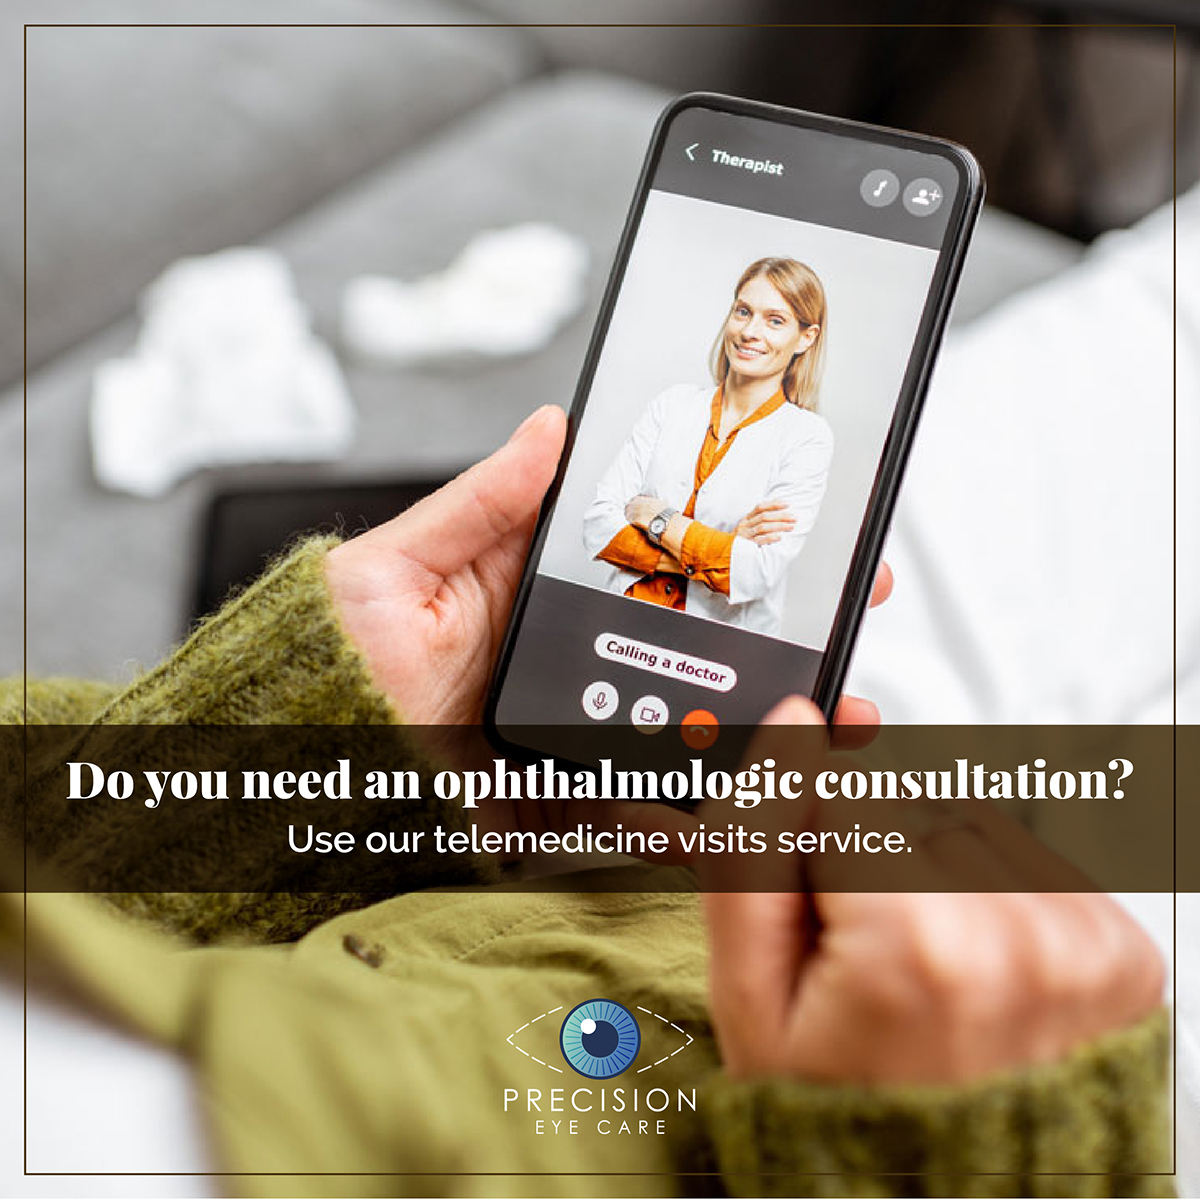 Do you need an ophthalmologic consultation?